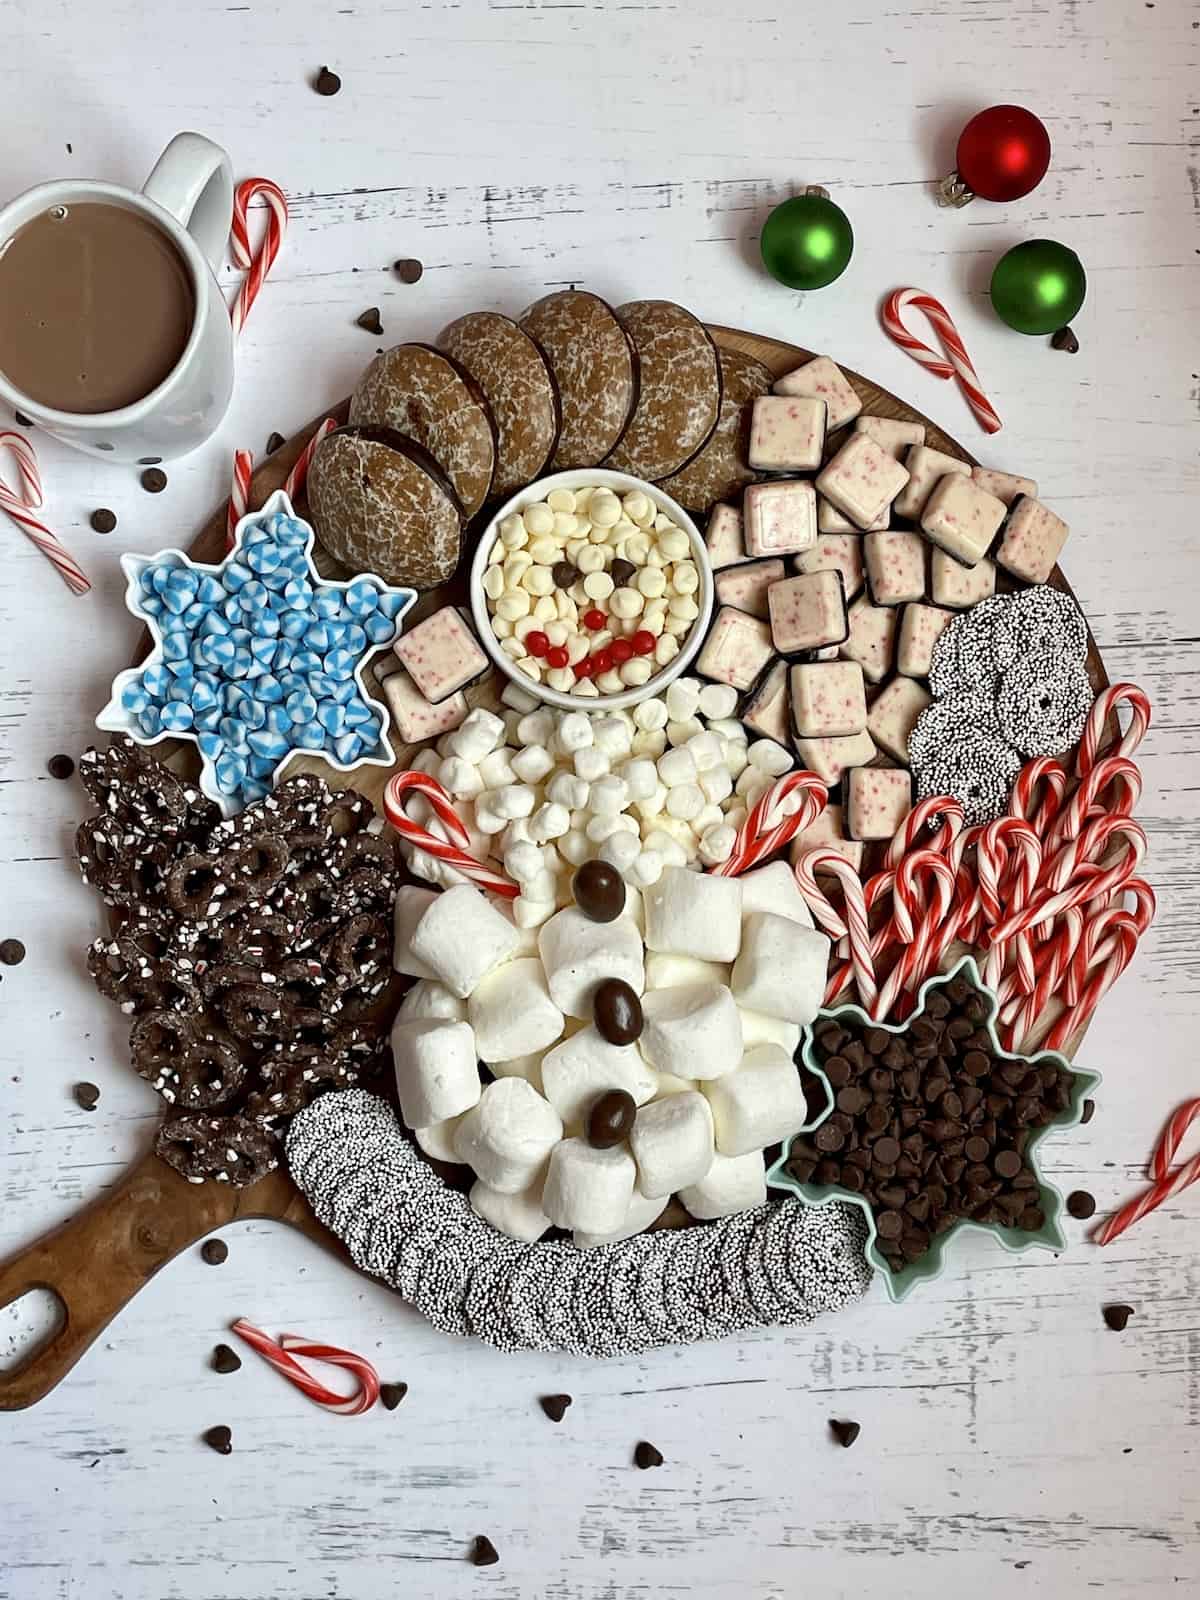 marshmallows and white chocolate chips designed in a snowman shape surrounded by candy canes, cookies, and pretzels on a wooden serving board